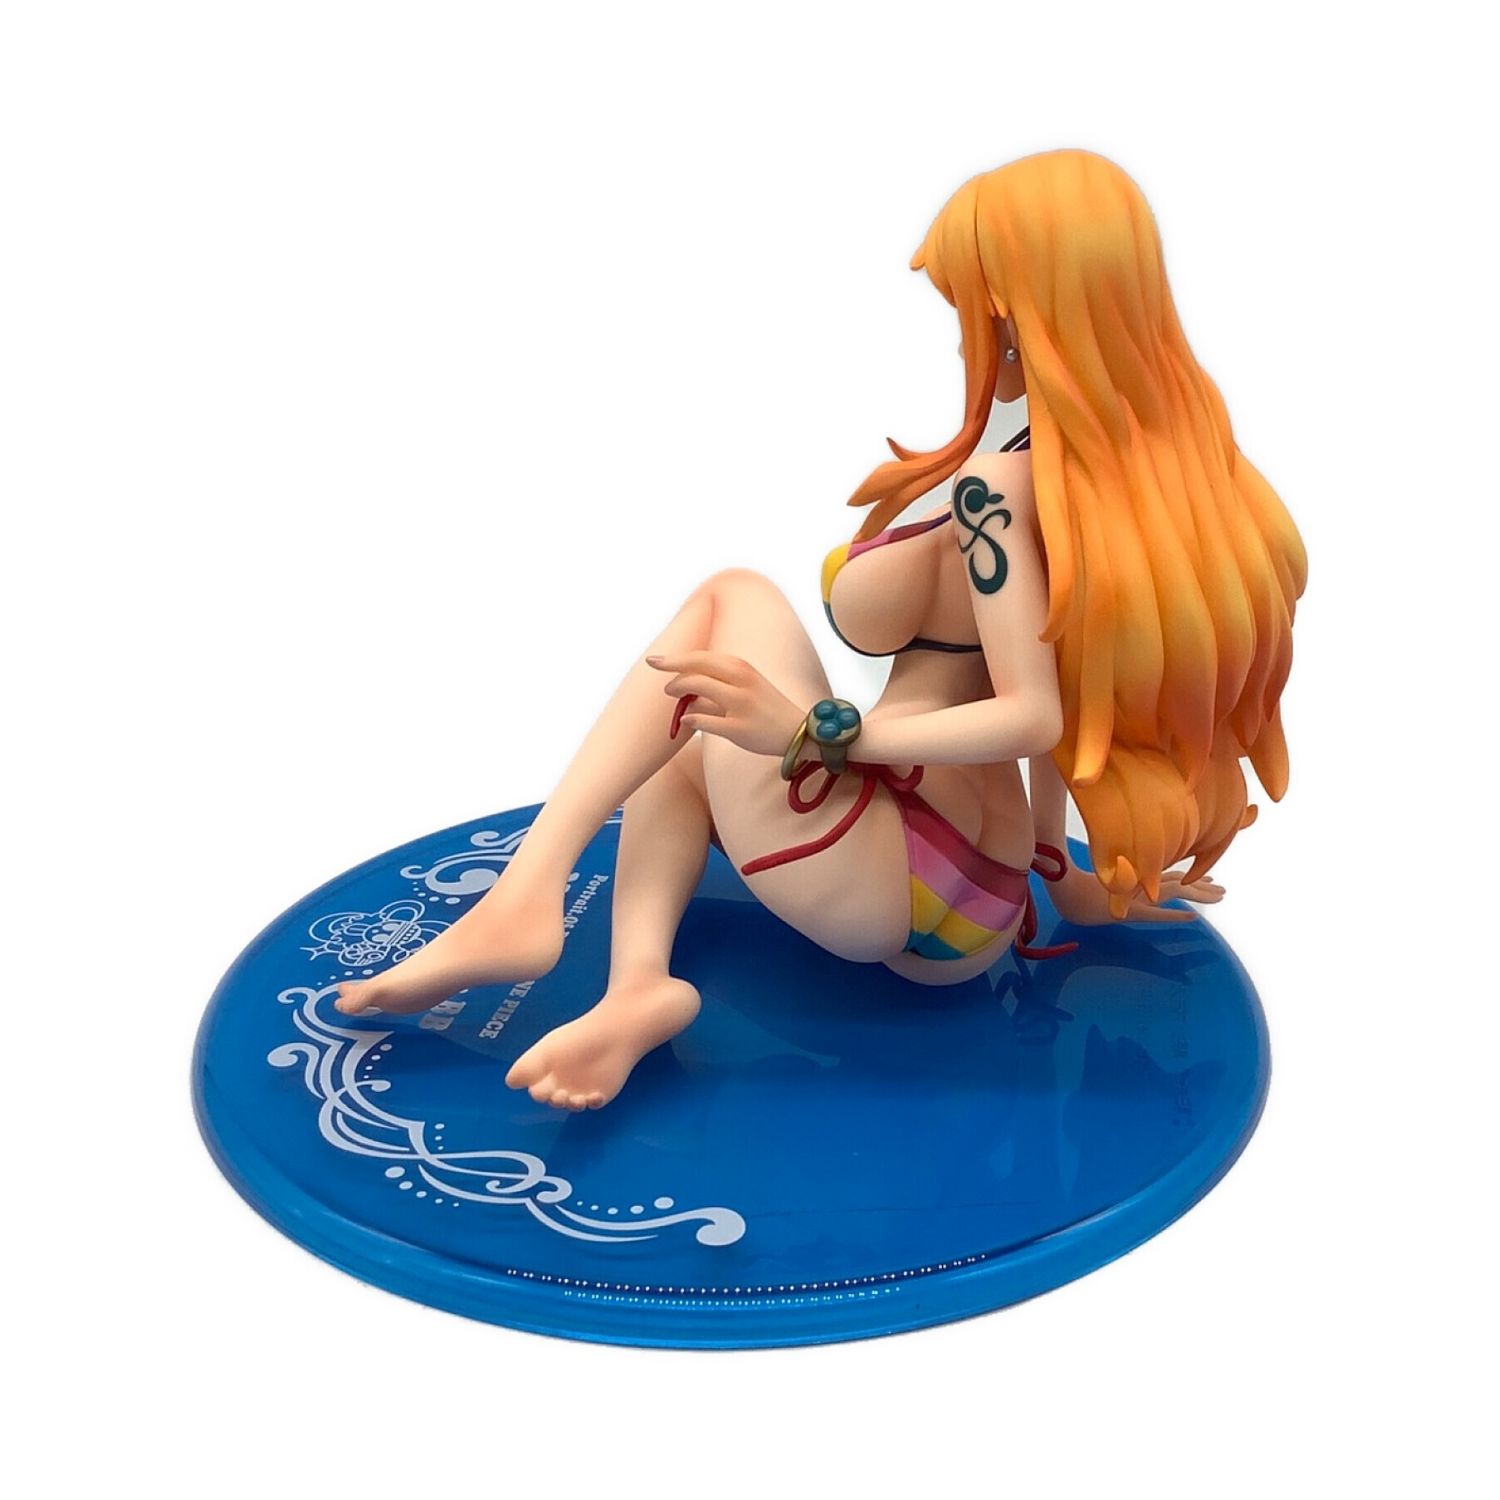 ONE PIECE (ワンピース) フィギュア ナミ P.O.P LIMITED Ver.BB 